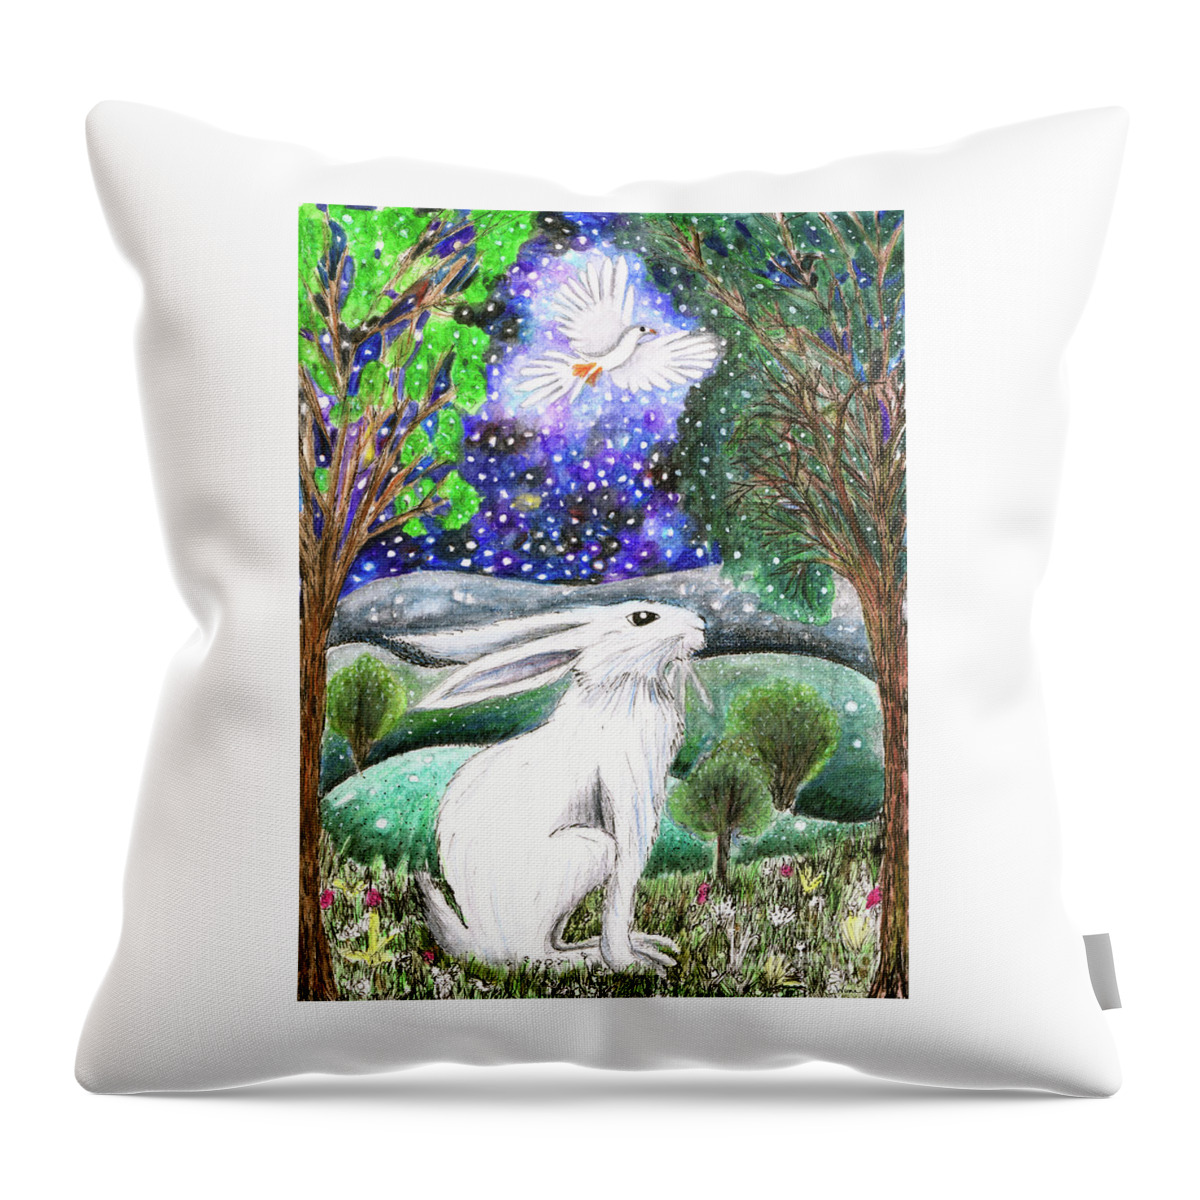 Lise Winne Throw Pillow featuring the painting Between the Trees by Lise Winne